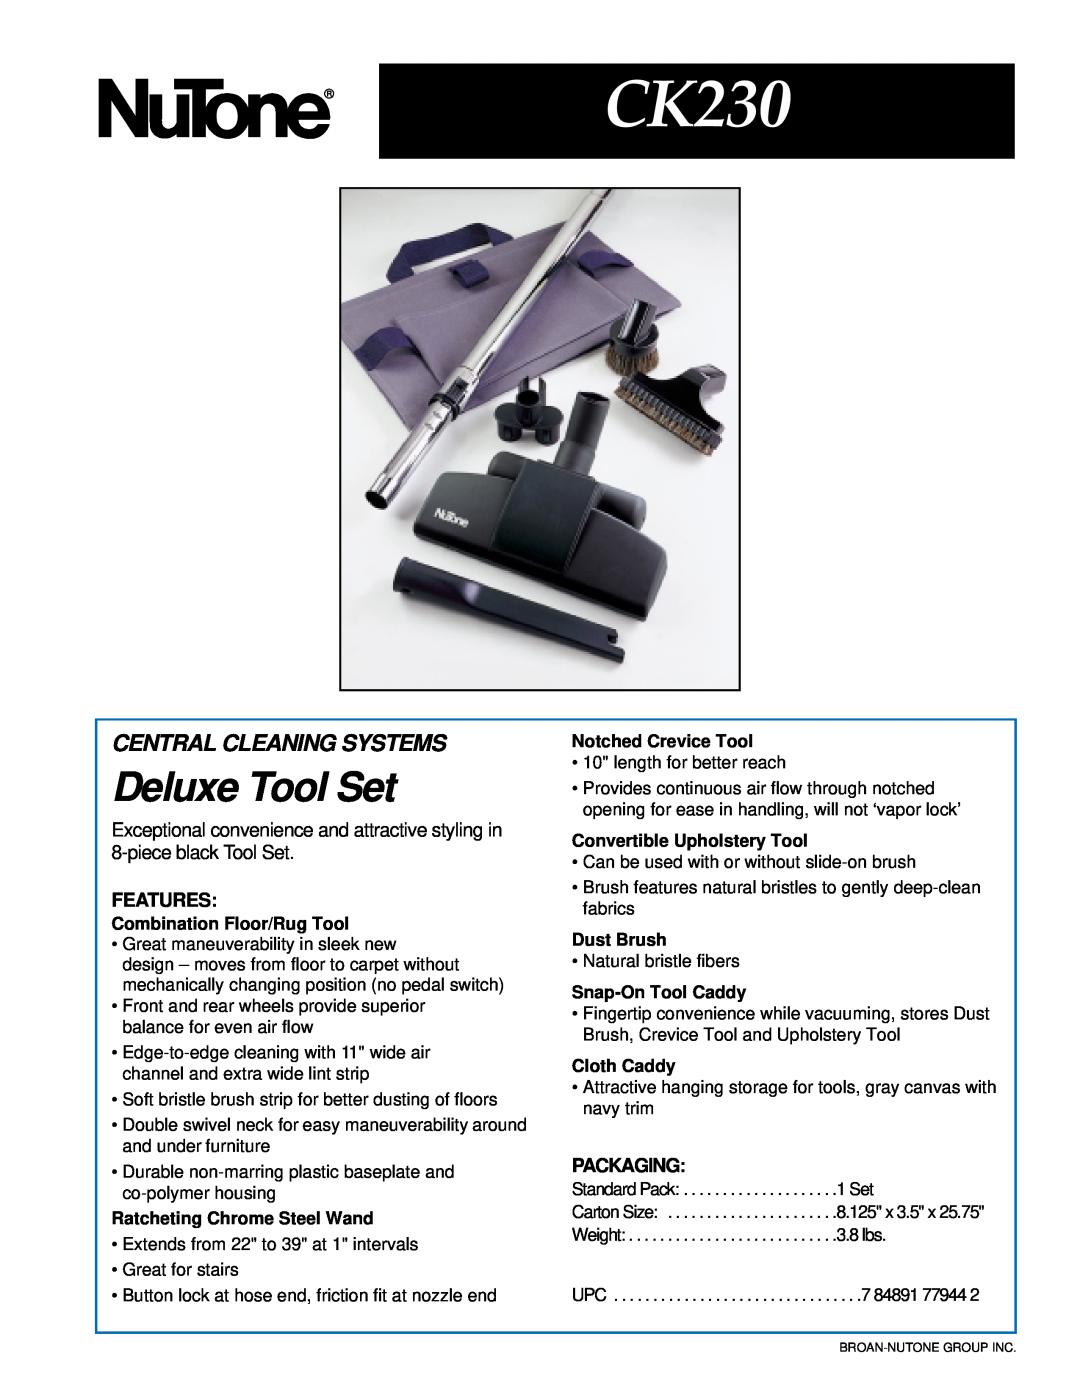 NuTone CK230 manual Deluxe Tool Set, Central Cleaning Systems, Exceptional convenience and attractive styling in, Features 